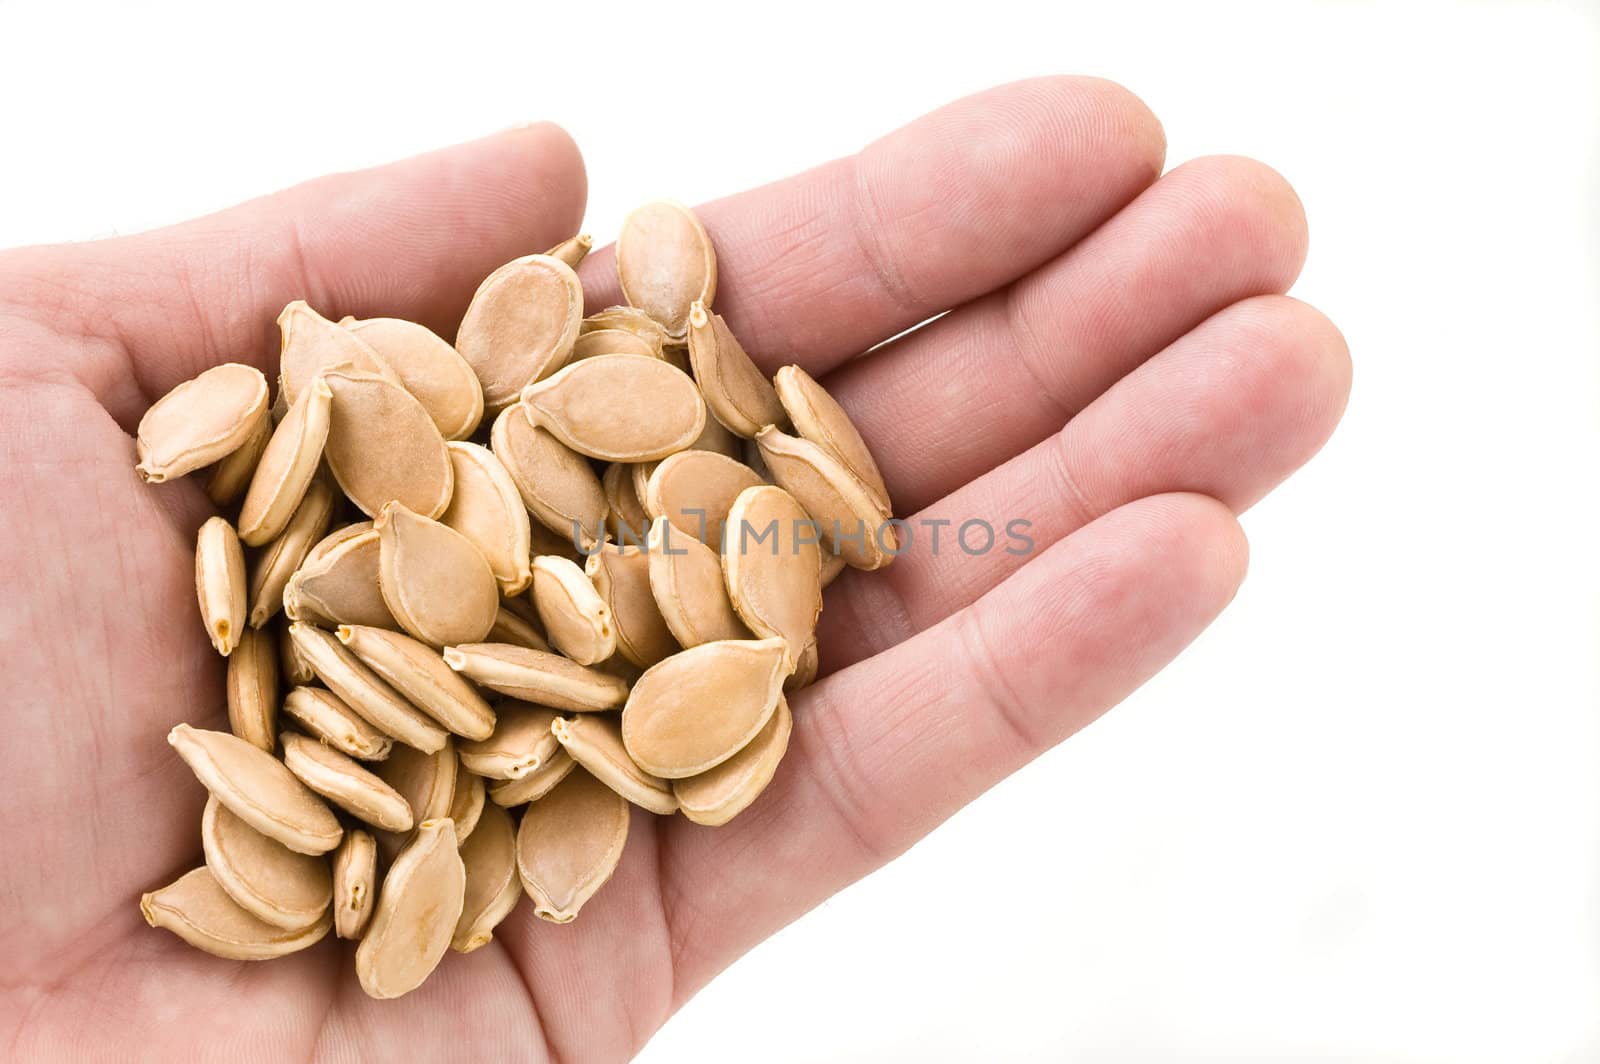 Handful of pumpkin seeds, white background, close up.